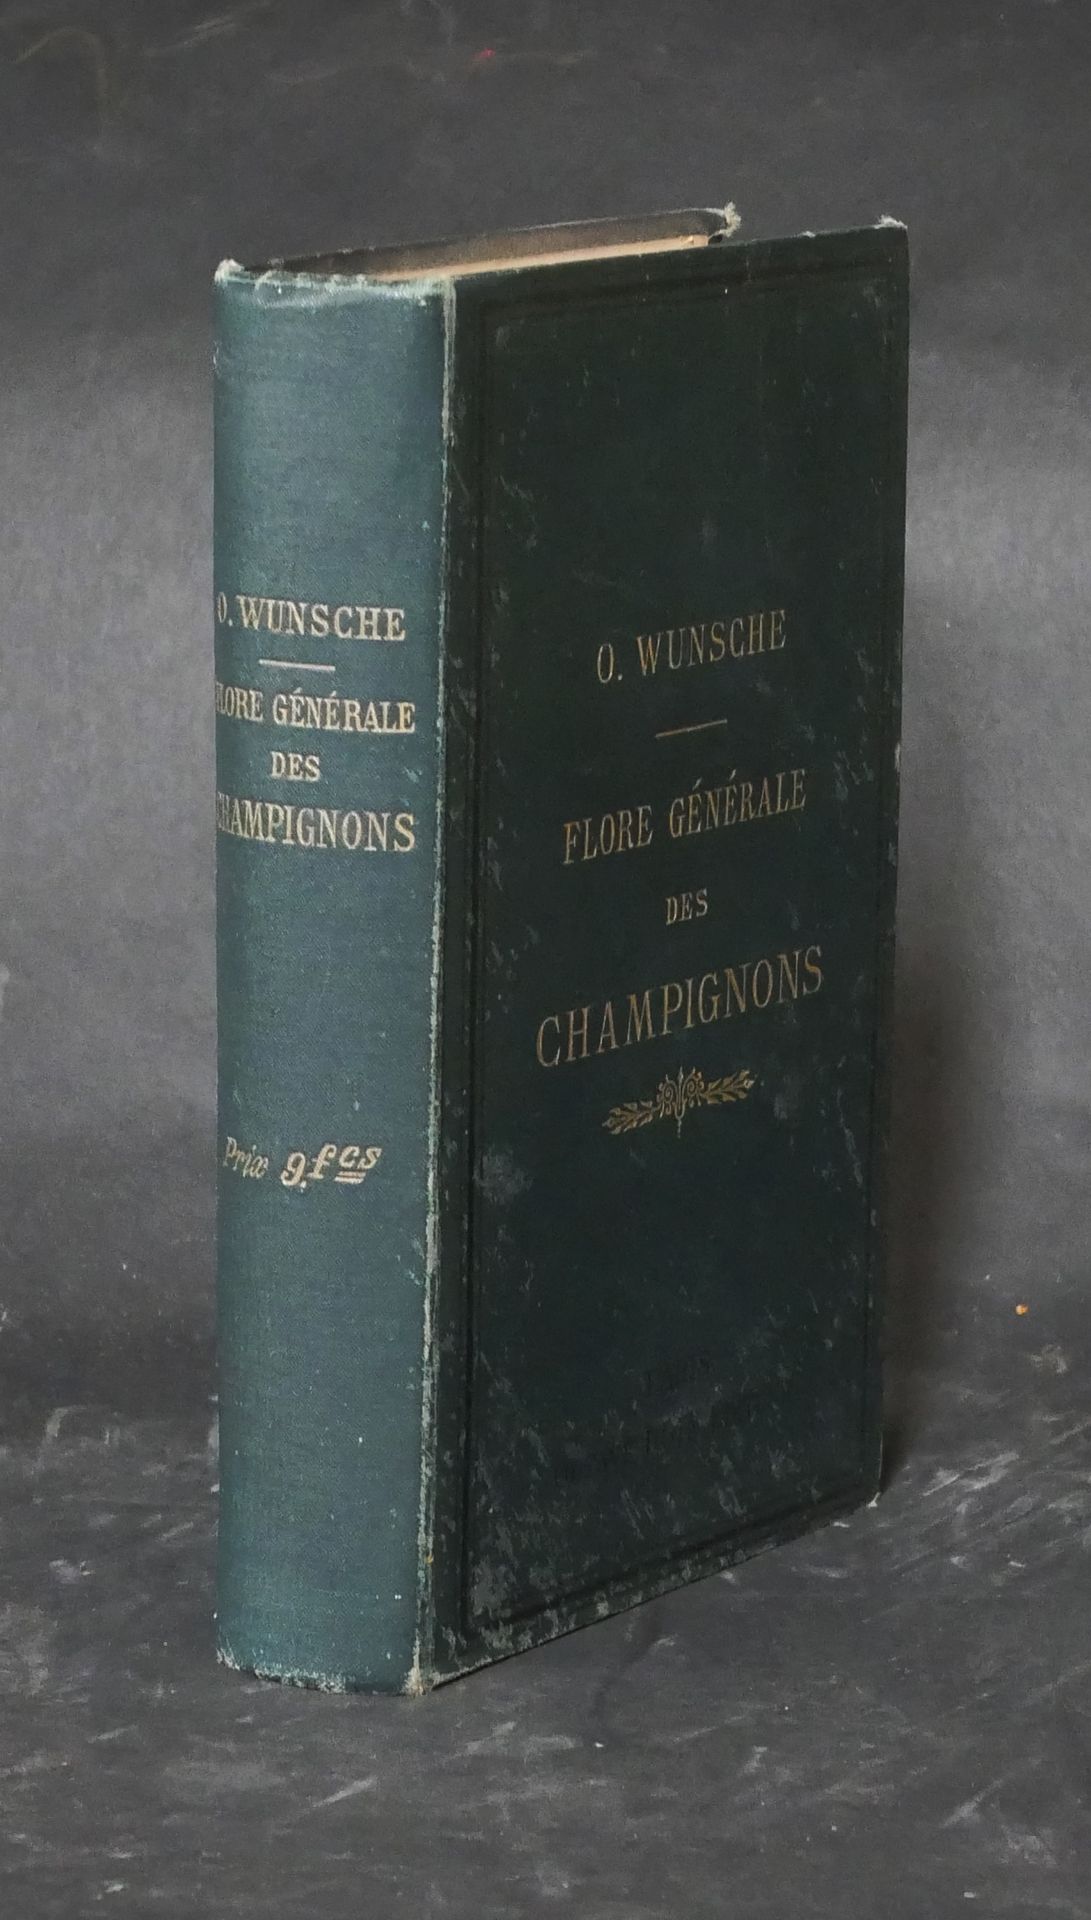 Null Otto WUNSCHE. General flora of mushrooms. Translated by J. L. Lanessan. Fre&hellip;